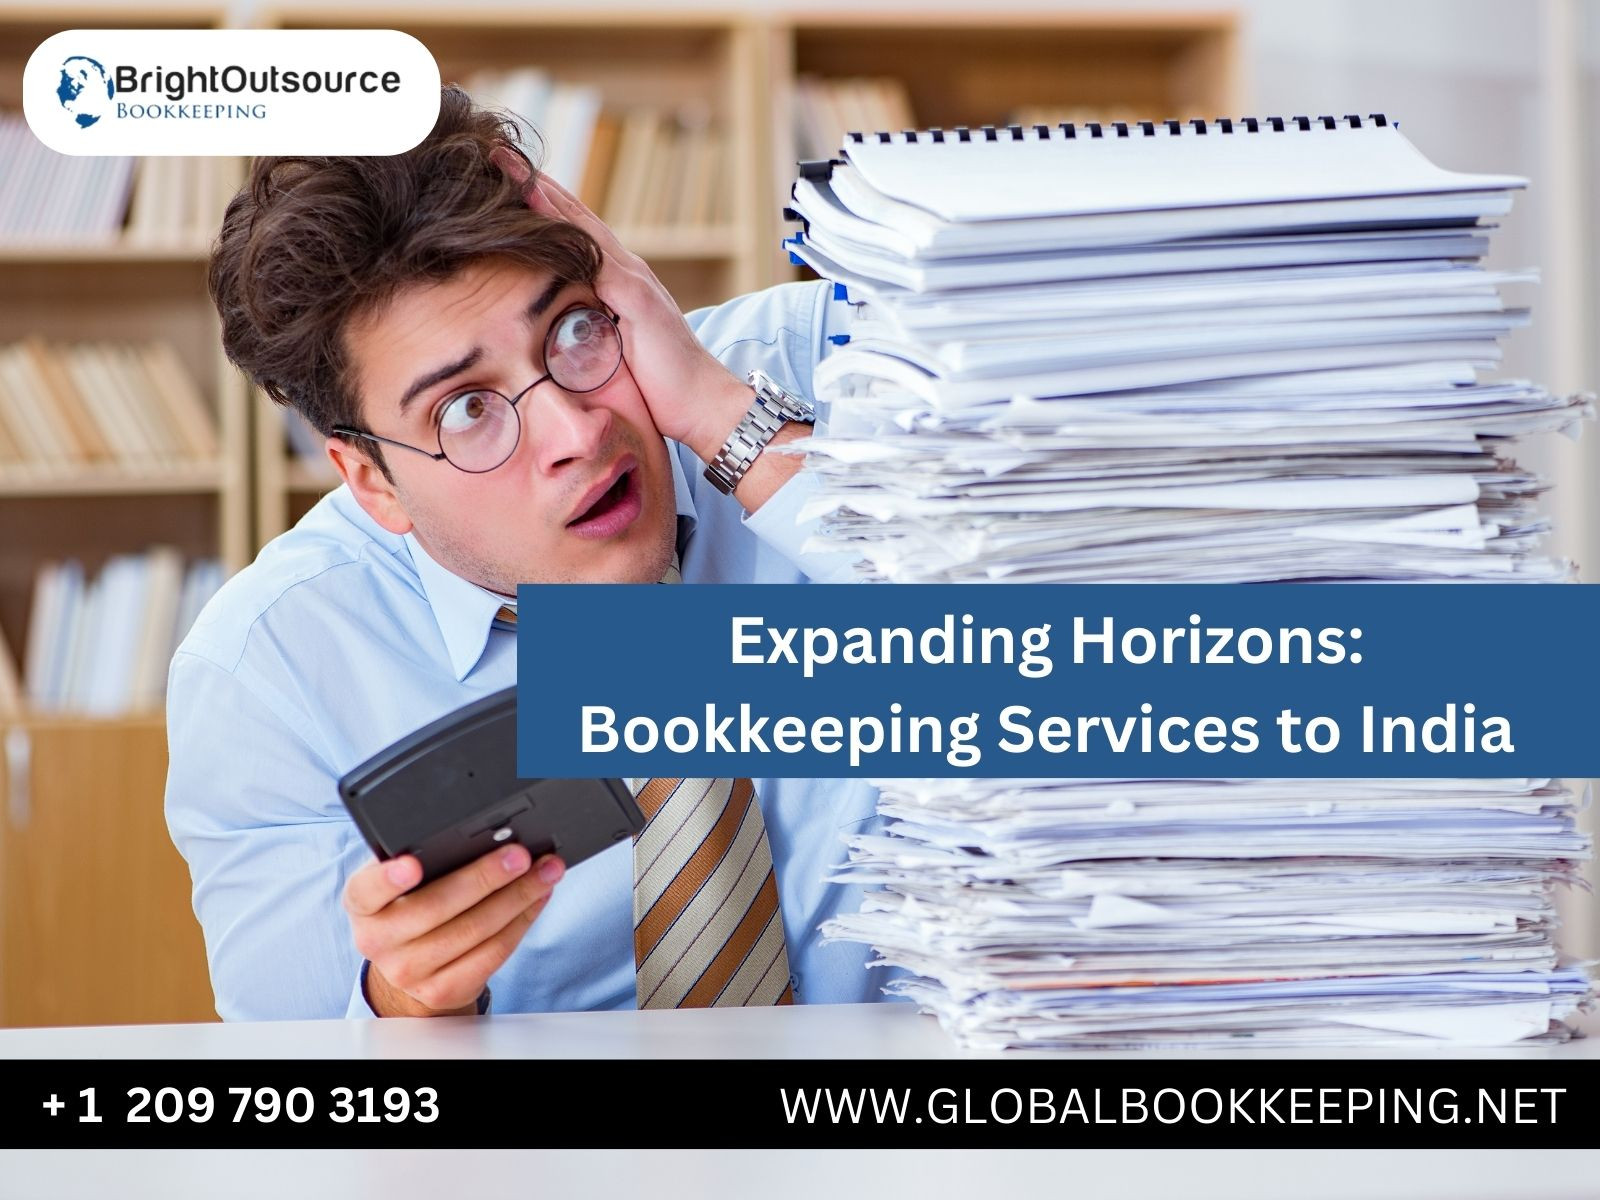 Expanding Horizons: Bookkeeping Services to India